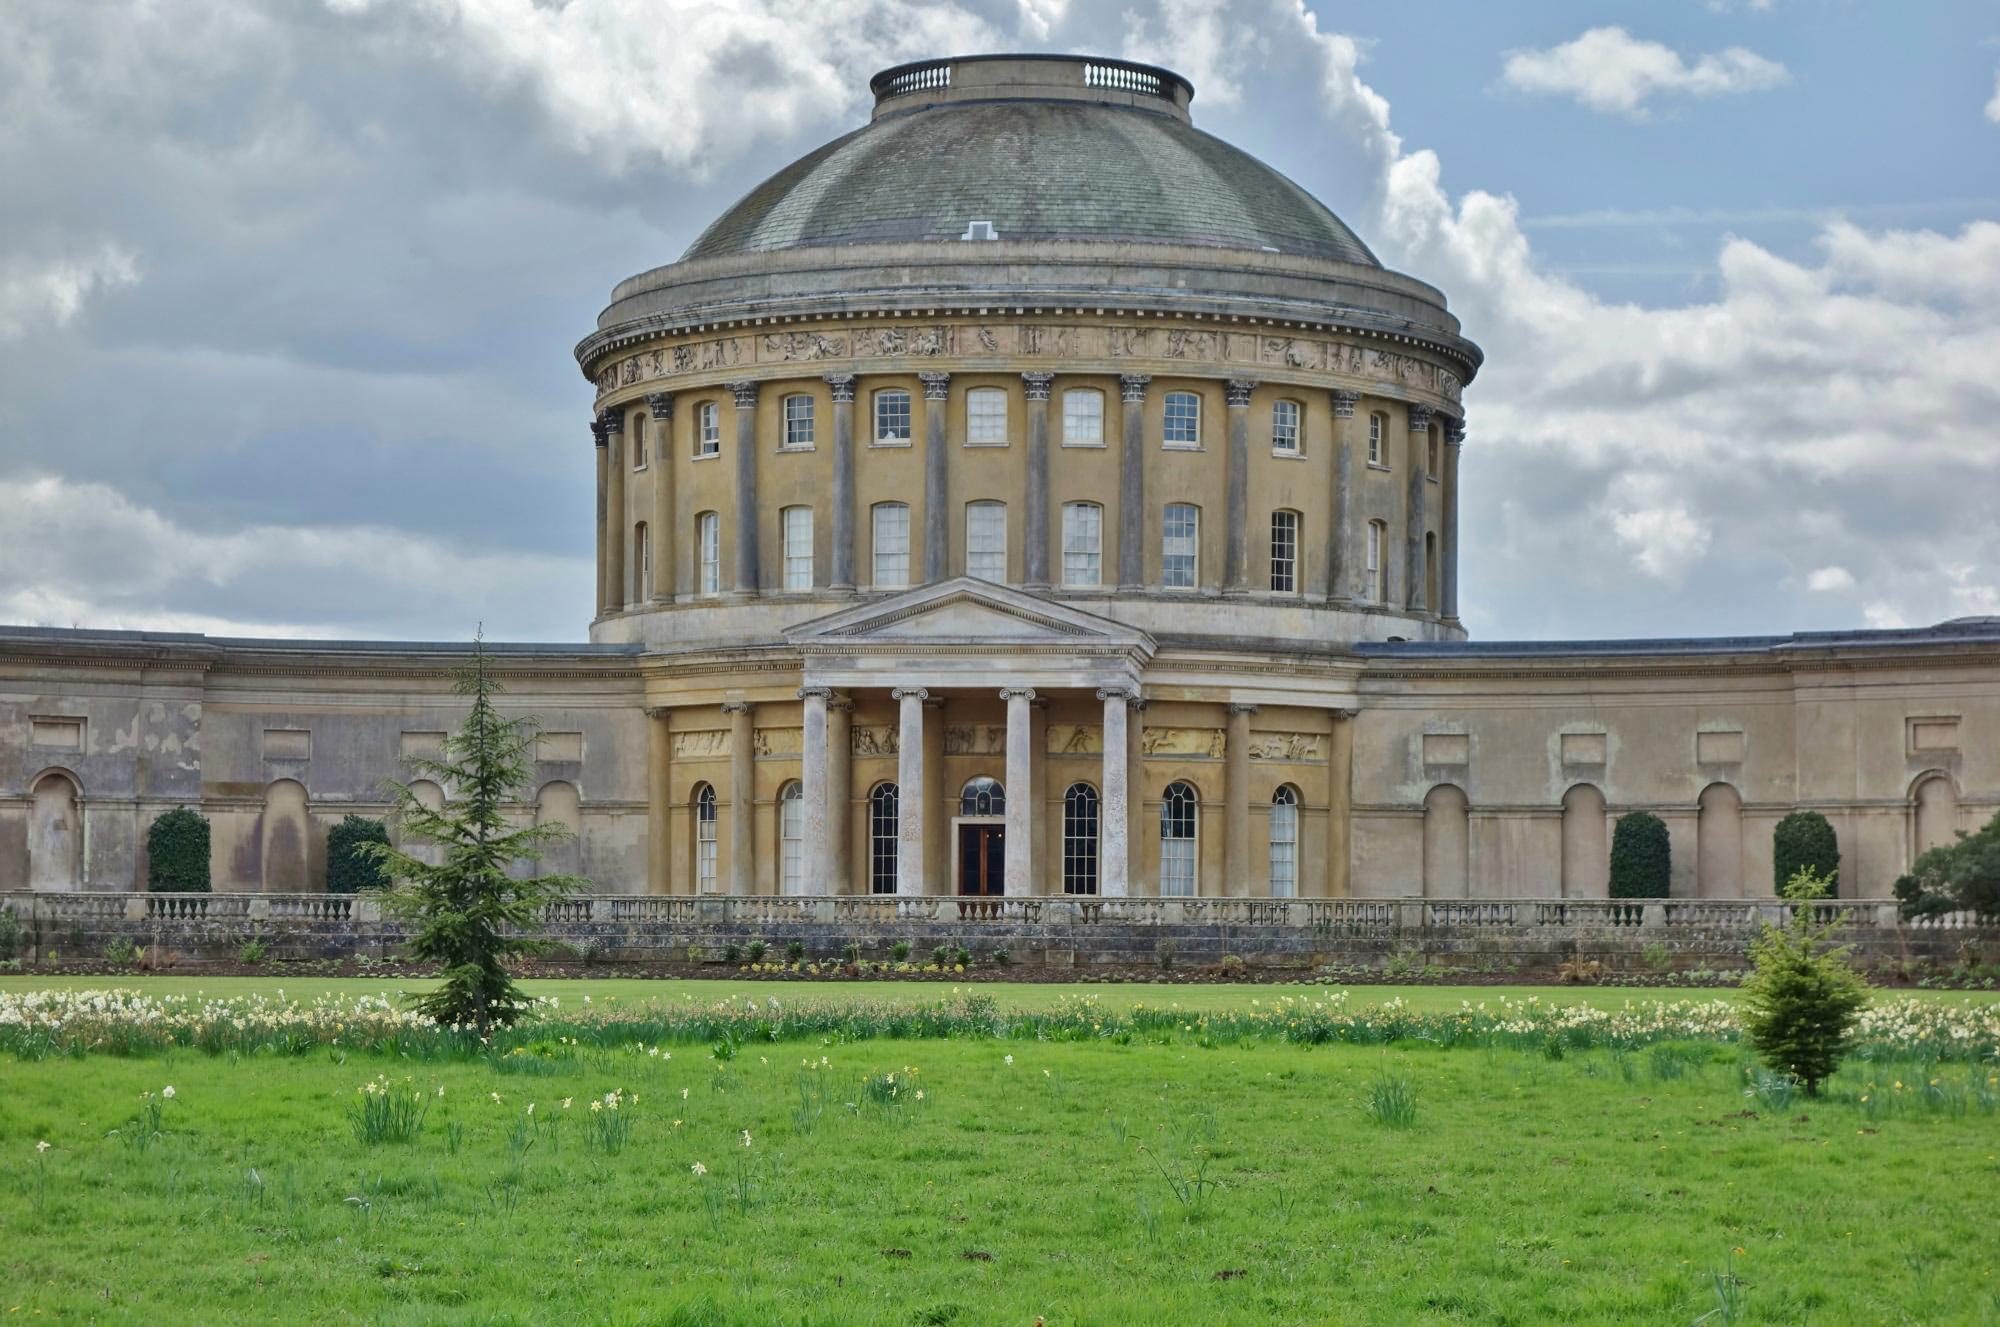 The Rotunda with corridors linking to the two wings of the house which are not shown here